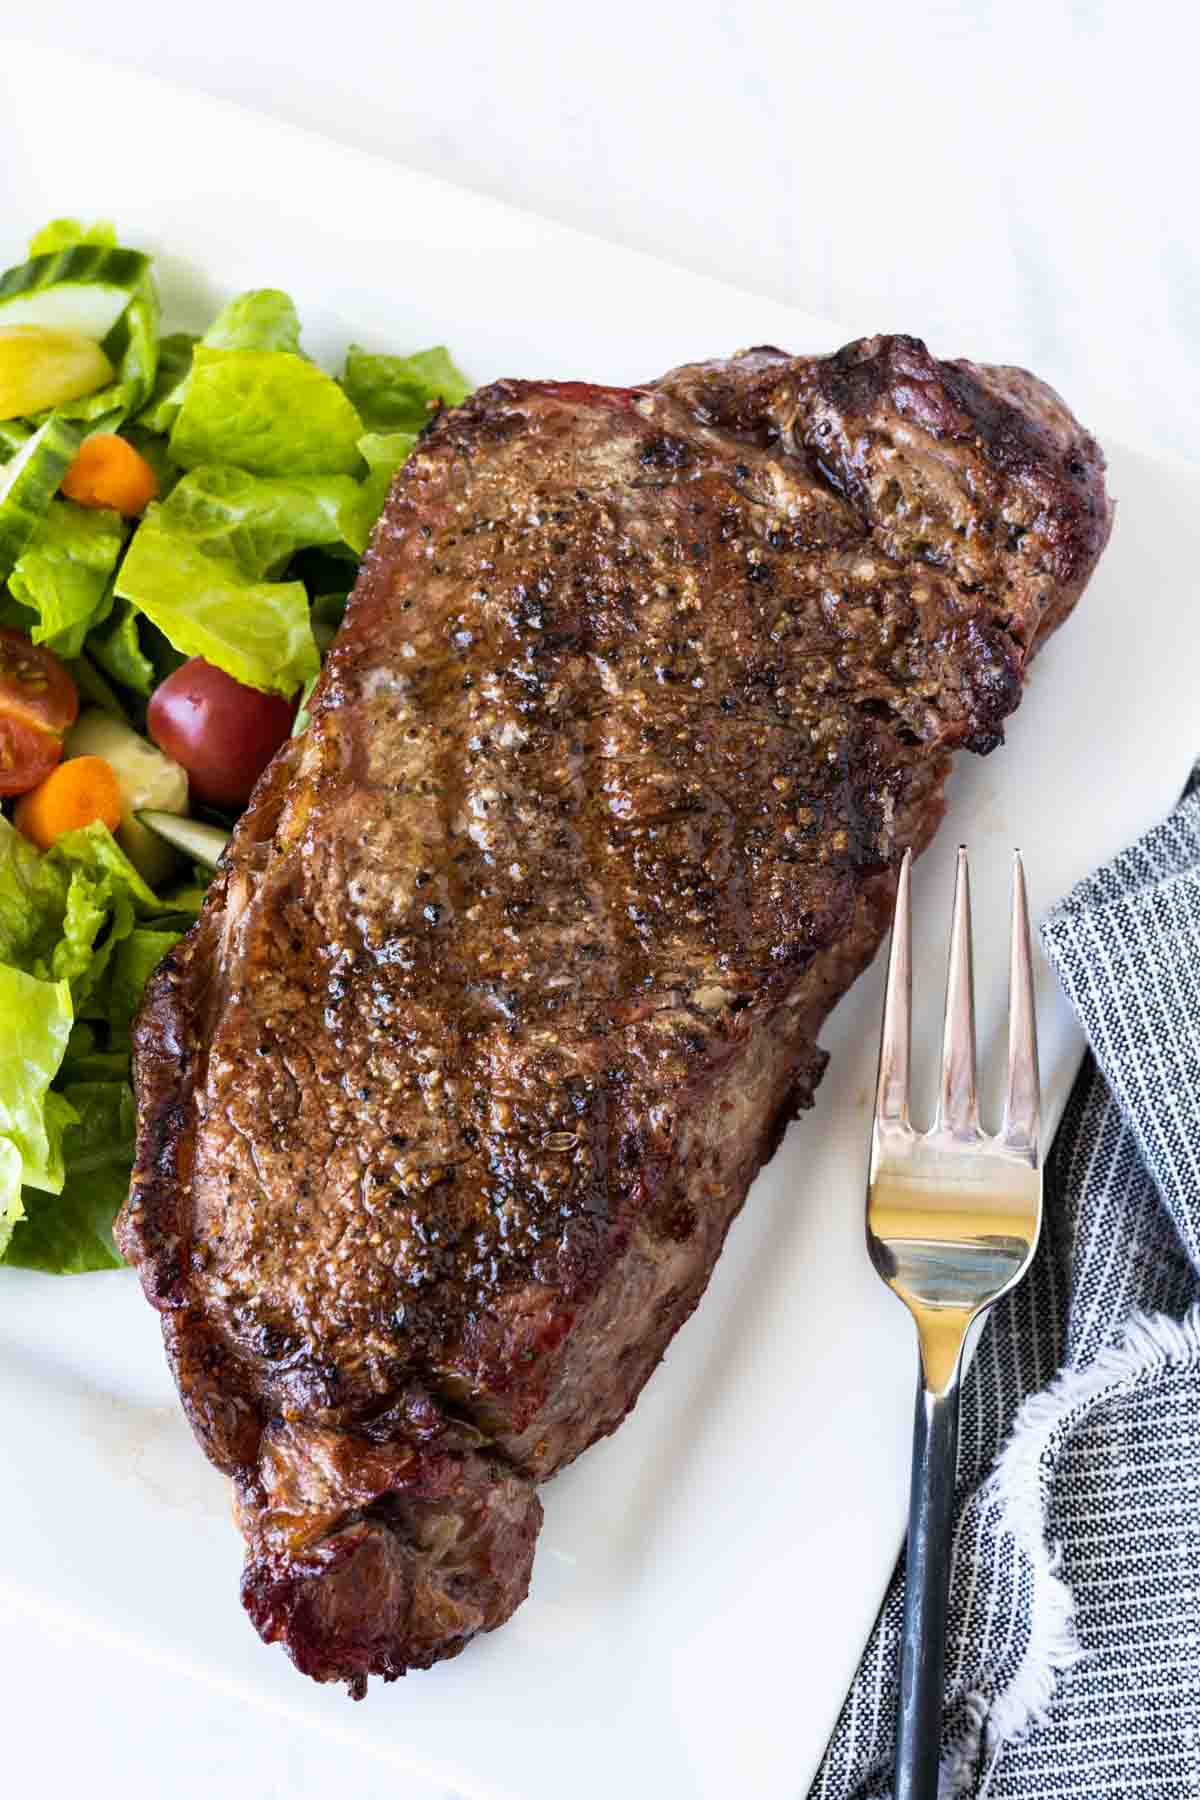 Grilled strip steak with a green salad.